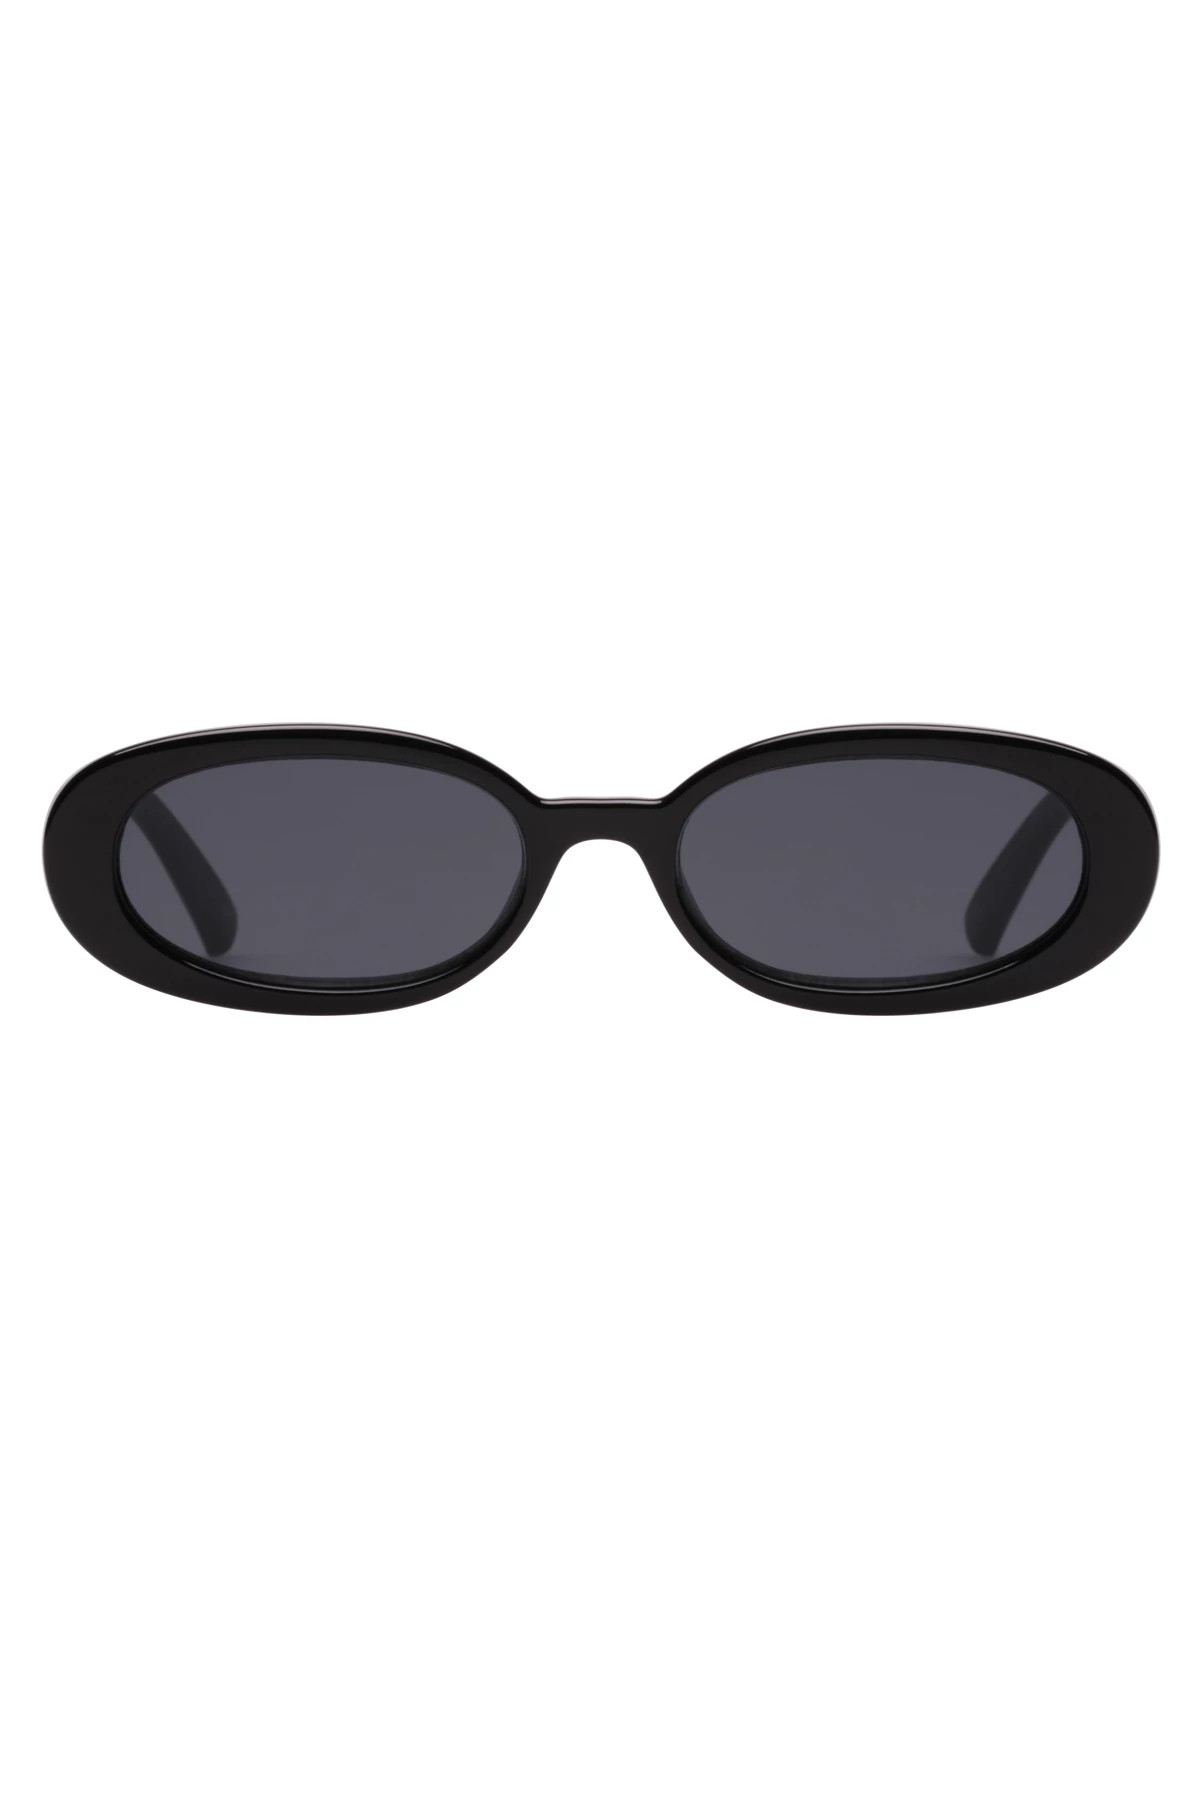 BLACK Outta Love Oval Sunglasses image number 2